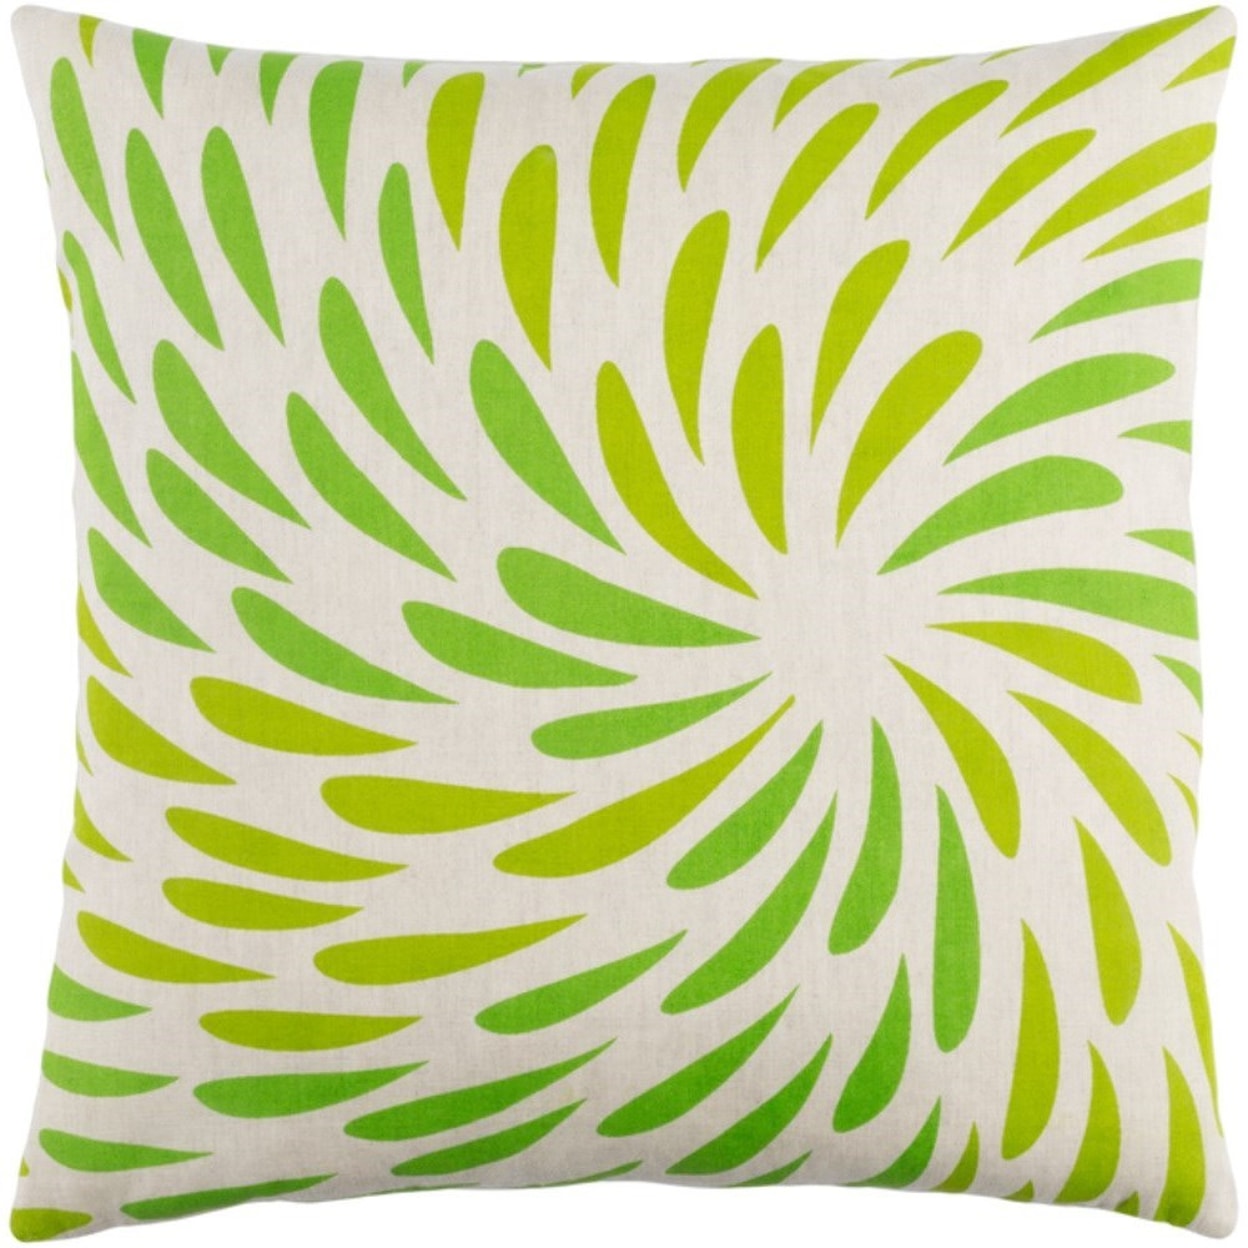 Surya Eye of the Storm Pillow